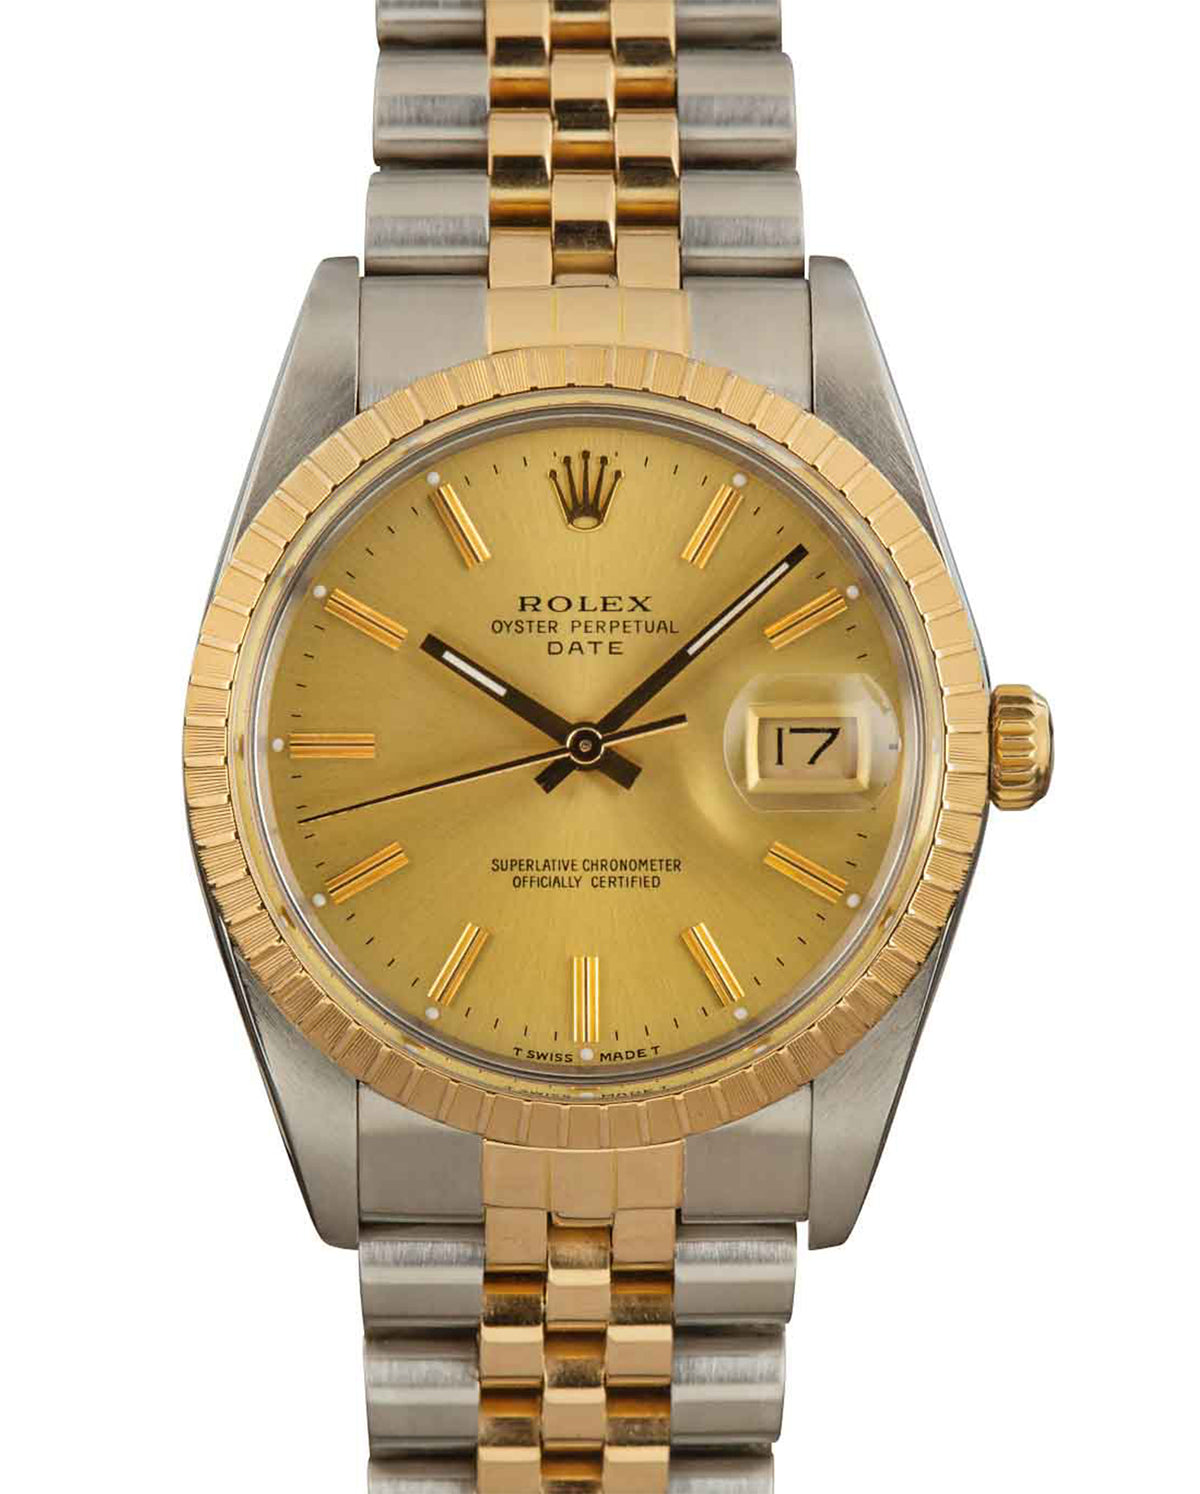 Rolex Datejust Yellow Gold/Stainless Steel 1987-1988